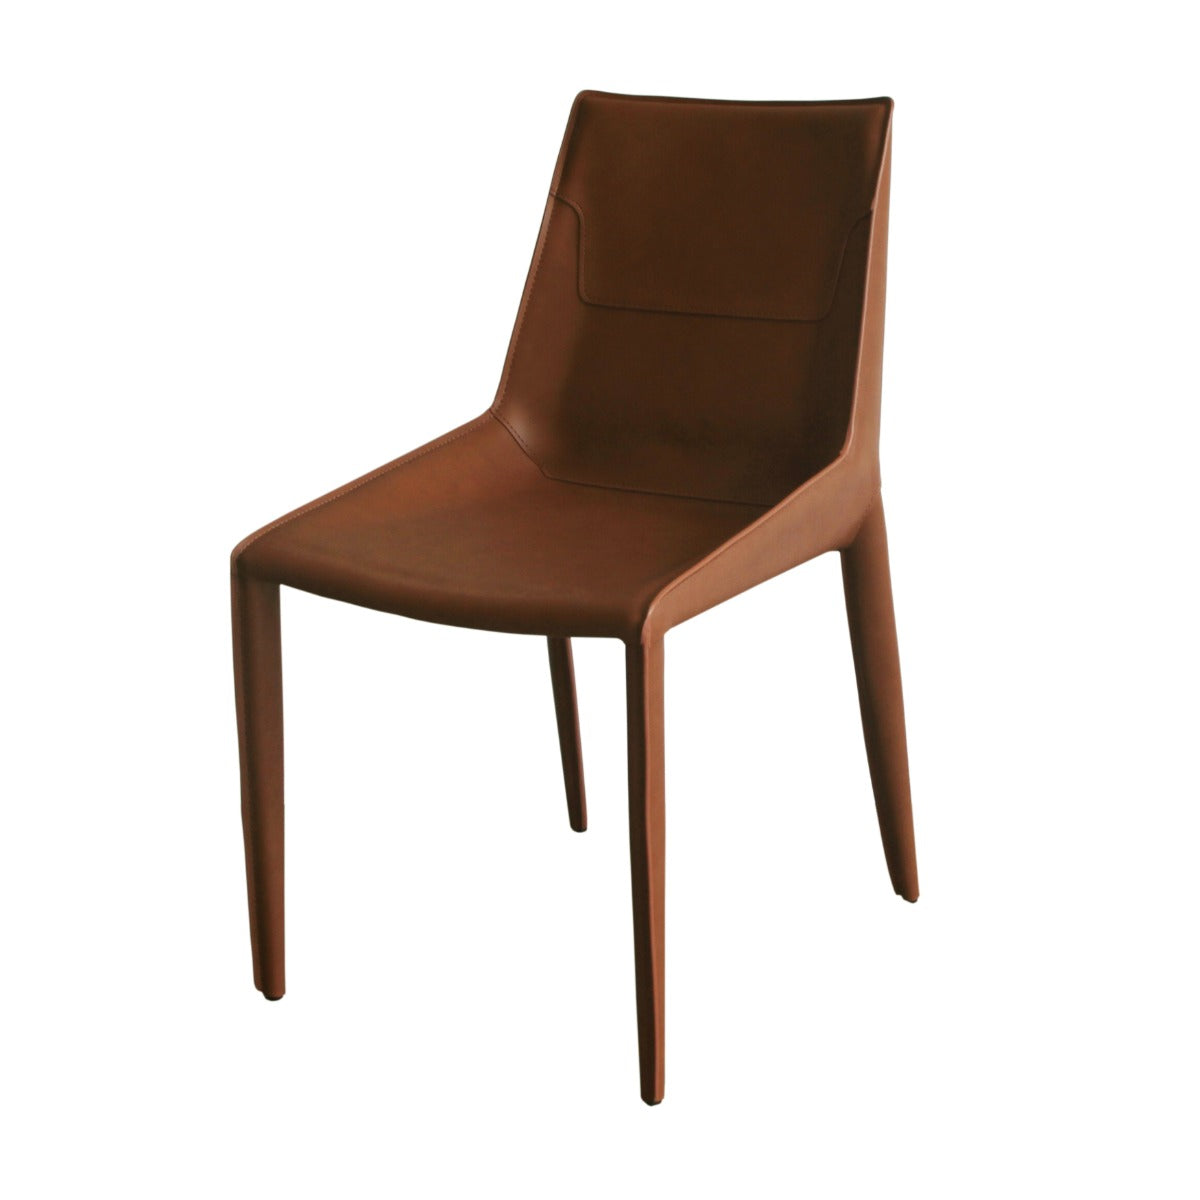 Modrest Halo - Modern Cognac Saddle Leather Dining Chair Set of Two-Dining Chair-VIG-Wall2Wall Furnishings